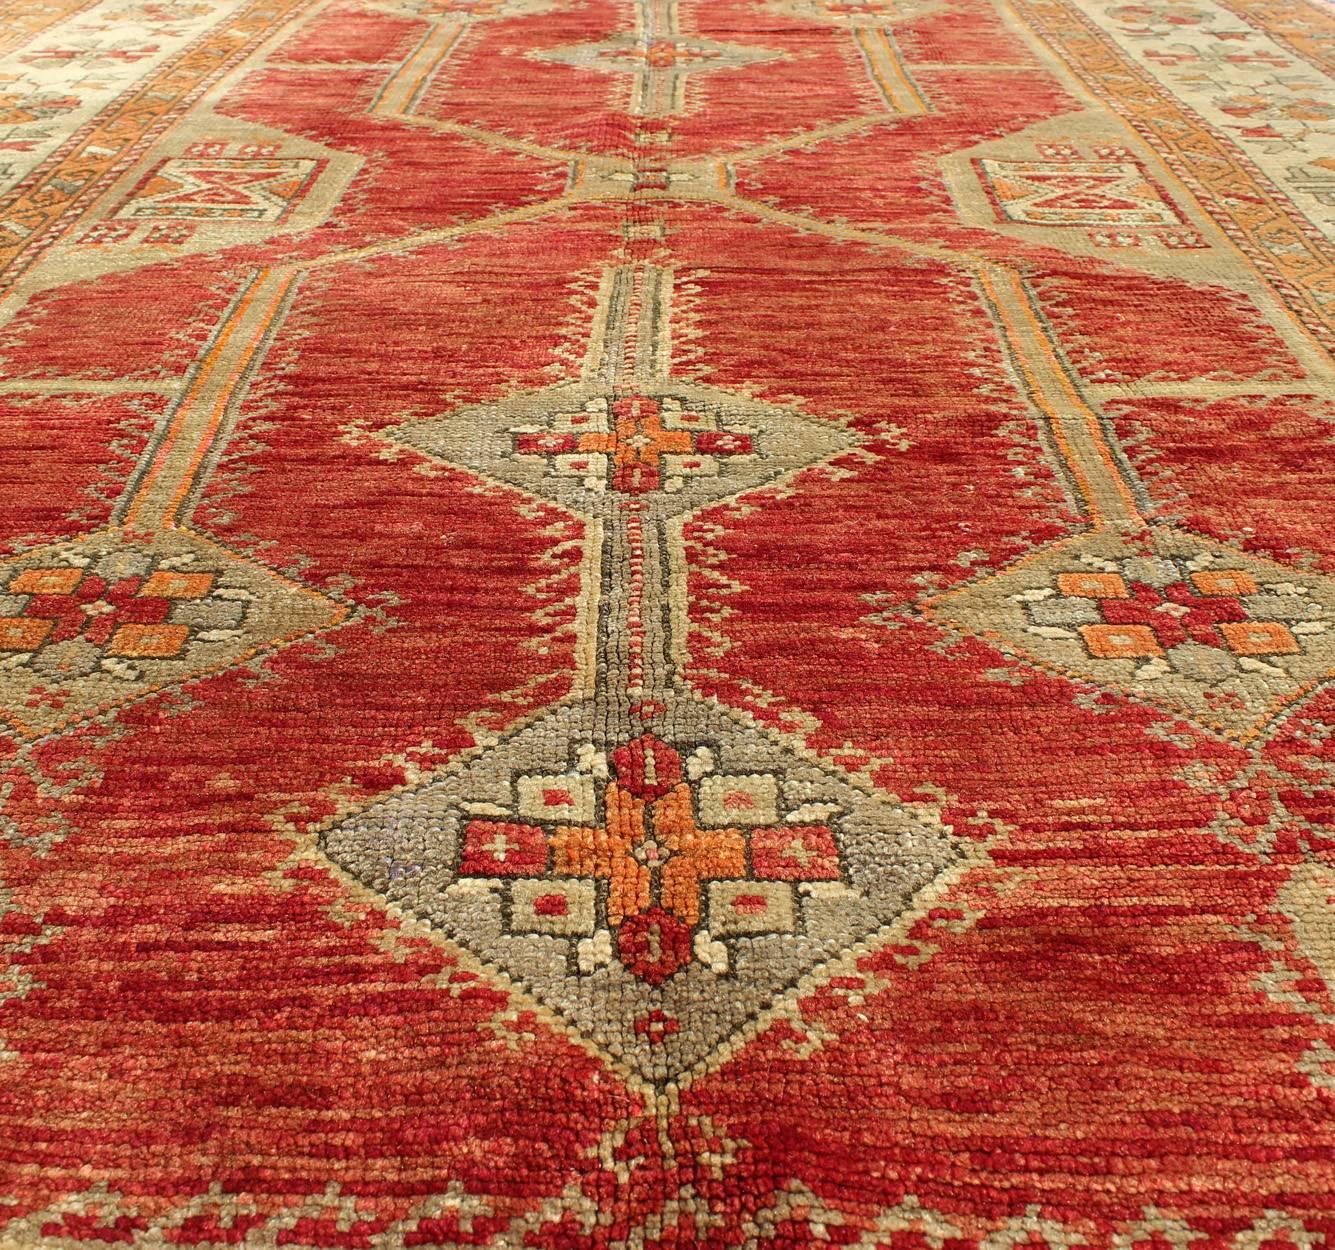 Antique Turkish Oushak Rug With Geometric Design in Red, Light Green & L. Orange For Sale 1